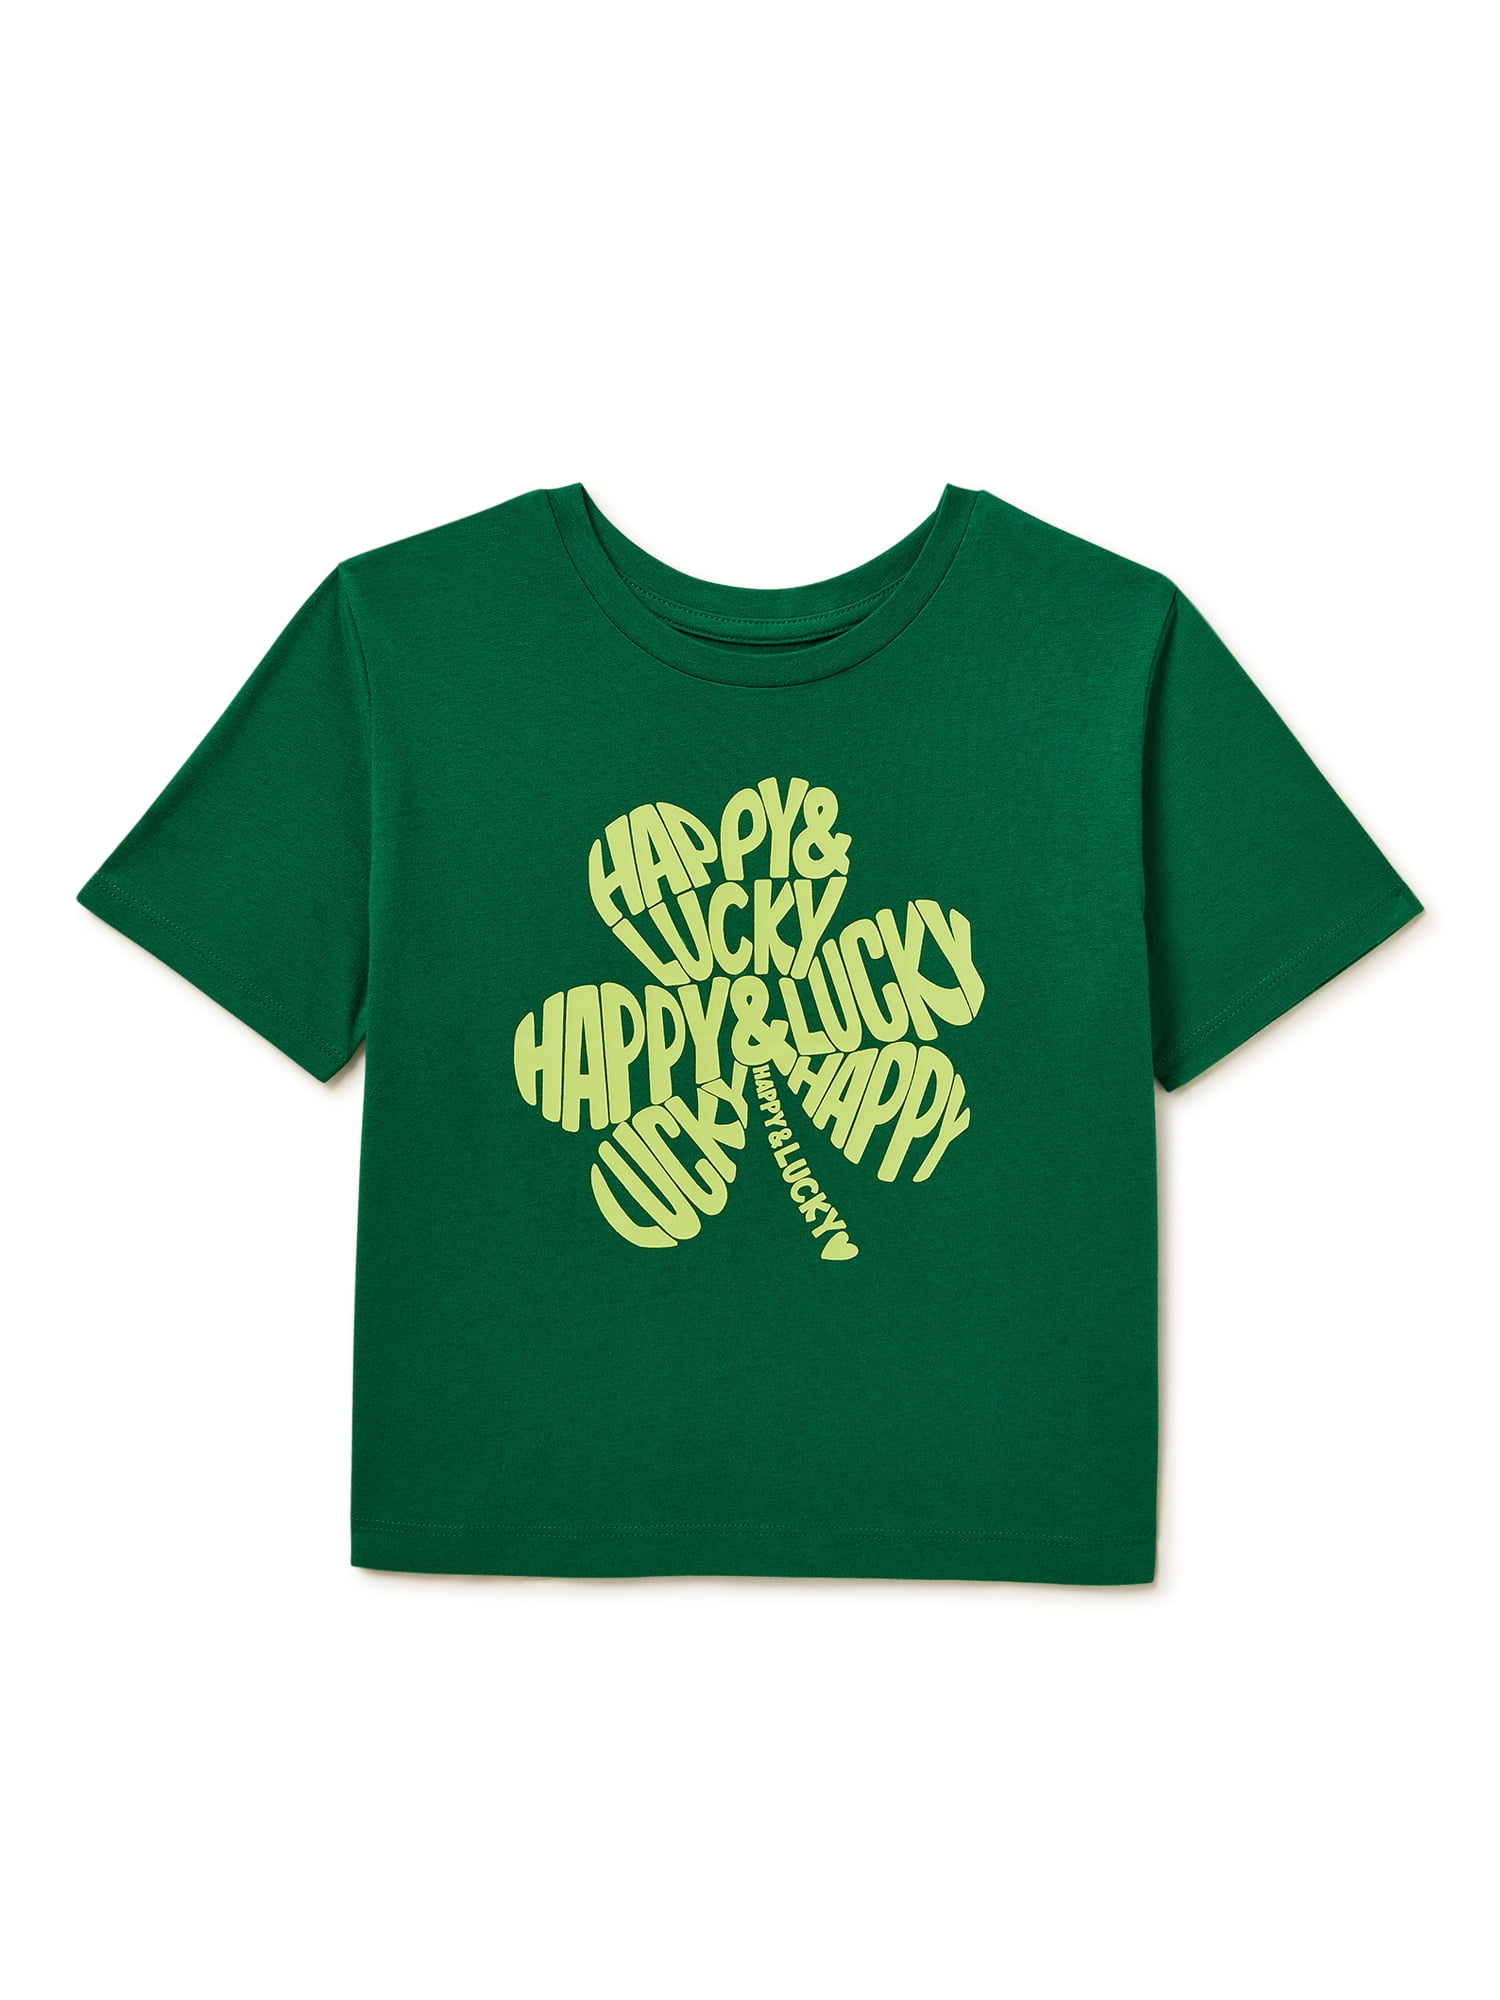 Girls St. Patrick's Day Short Sleeve Graphic Tee, Sizes 4-18